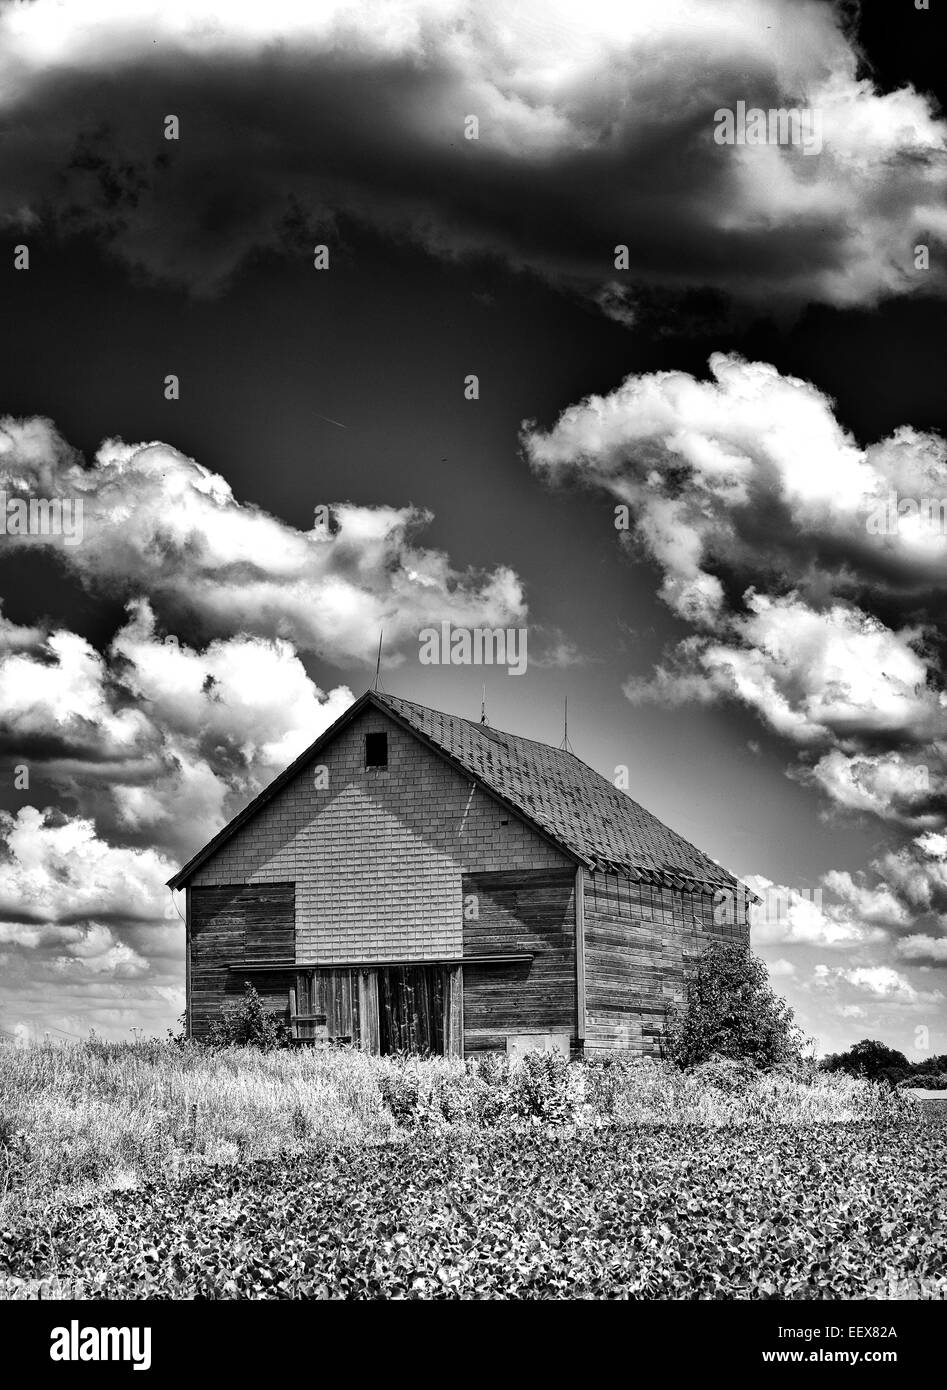 Spooky old desolate haunted barn with storm clouds overhead like you would see on Halloween in Black and White Stock Photo